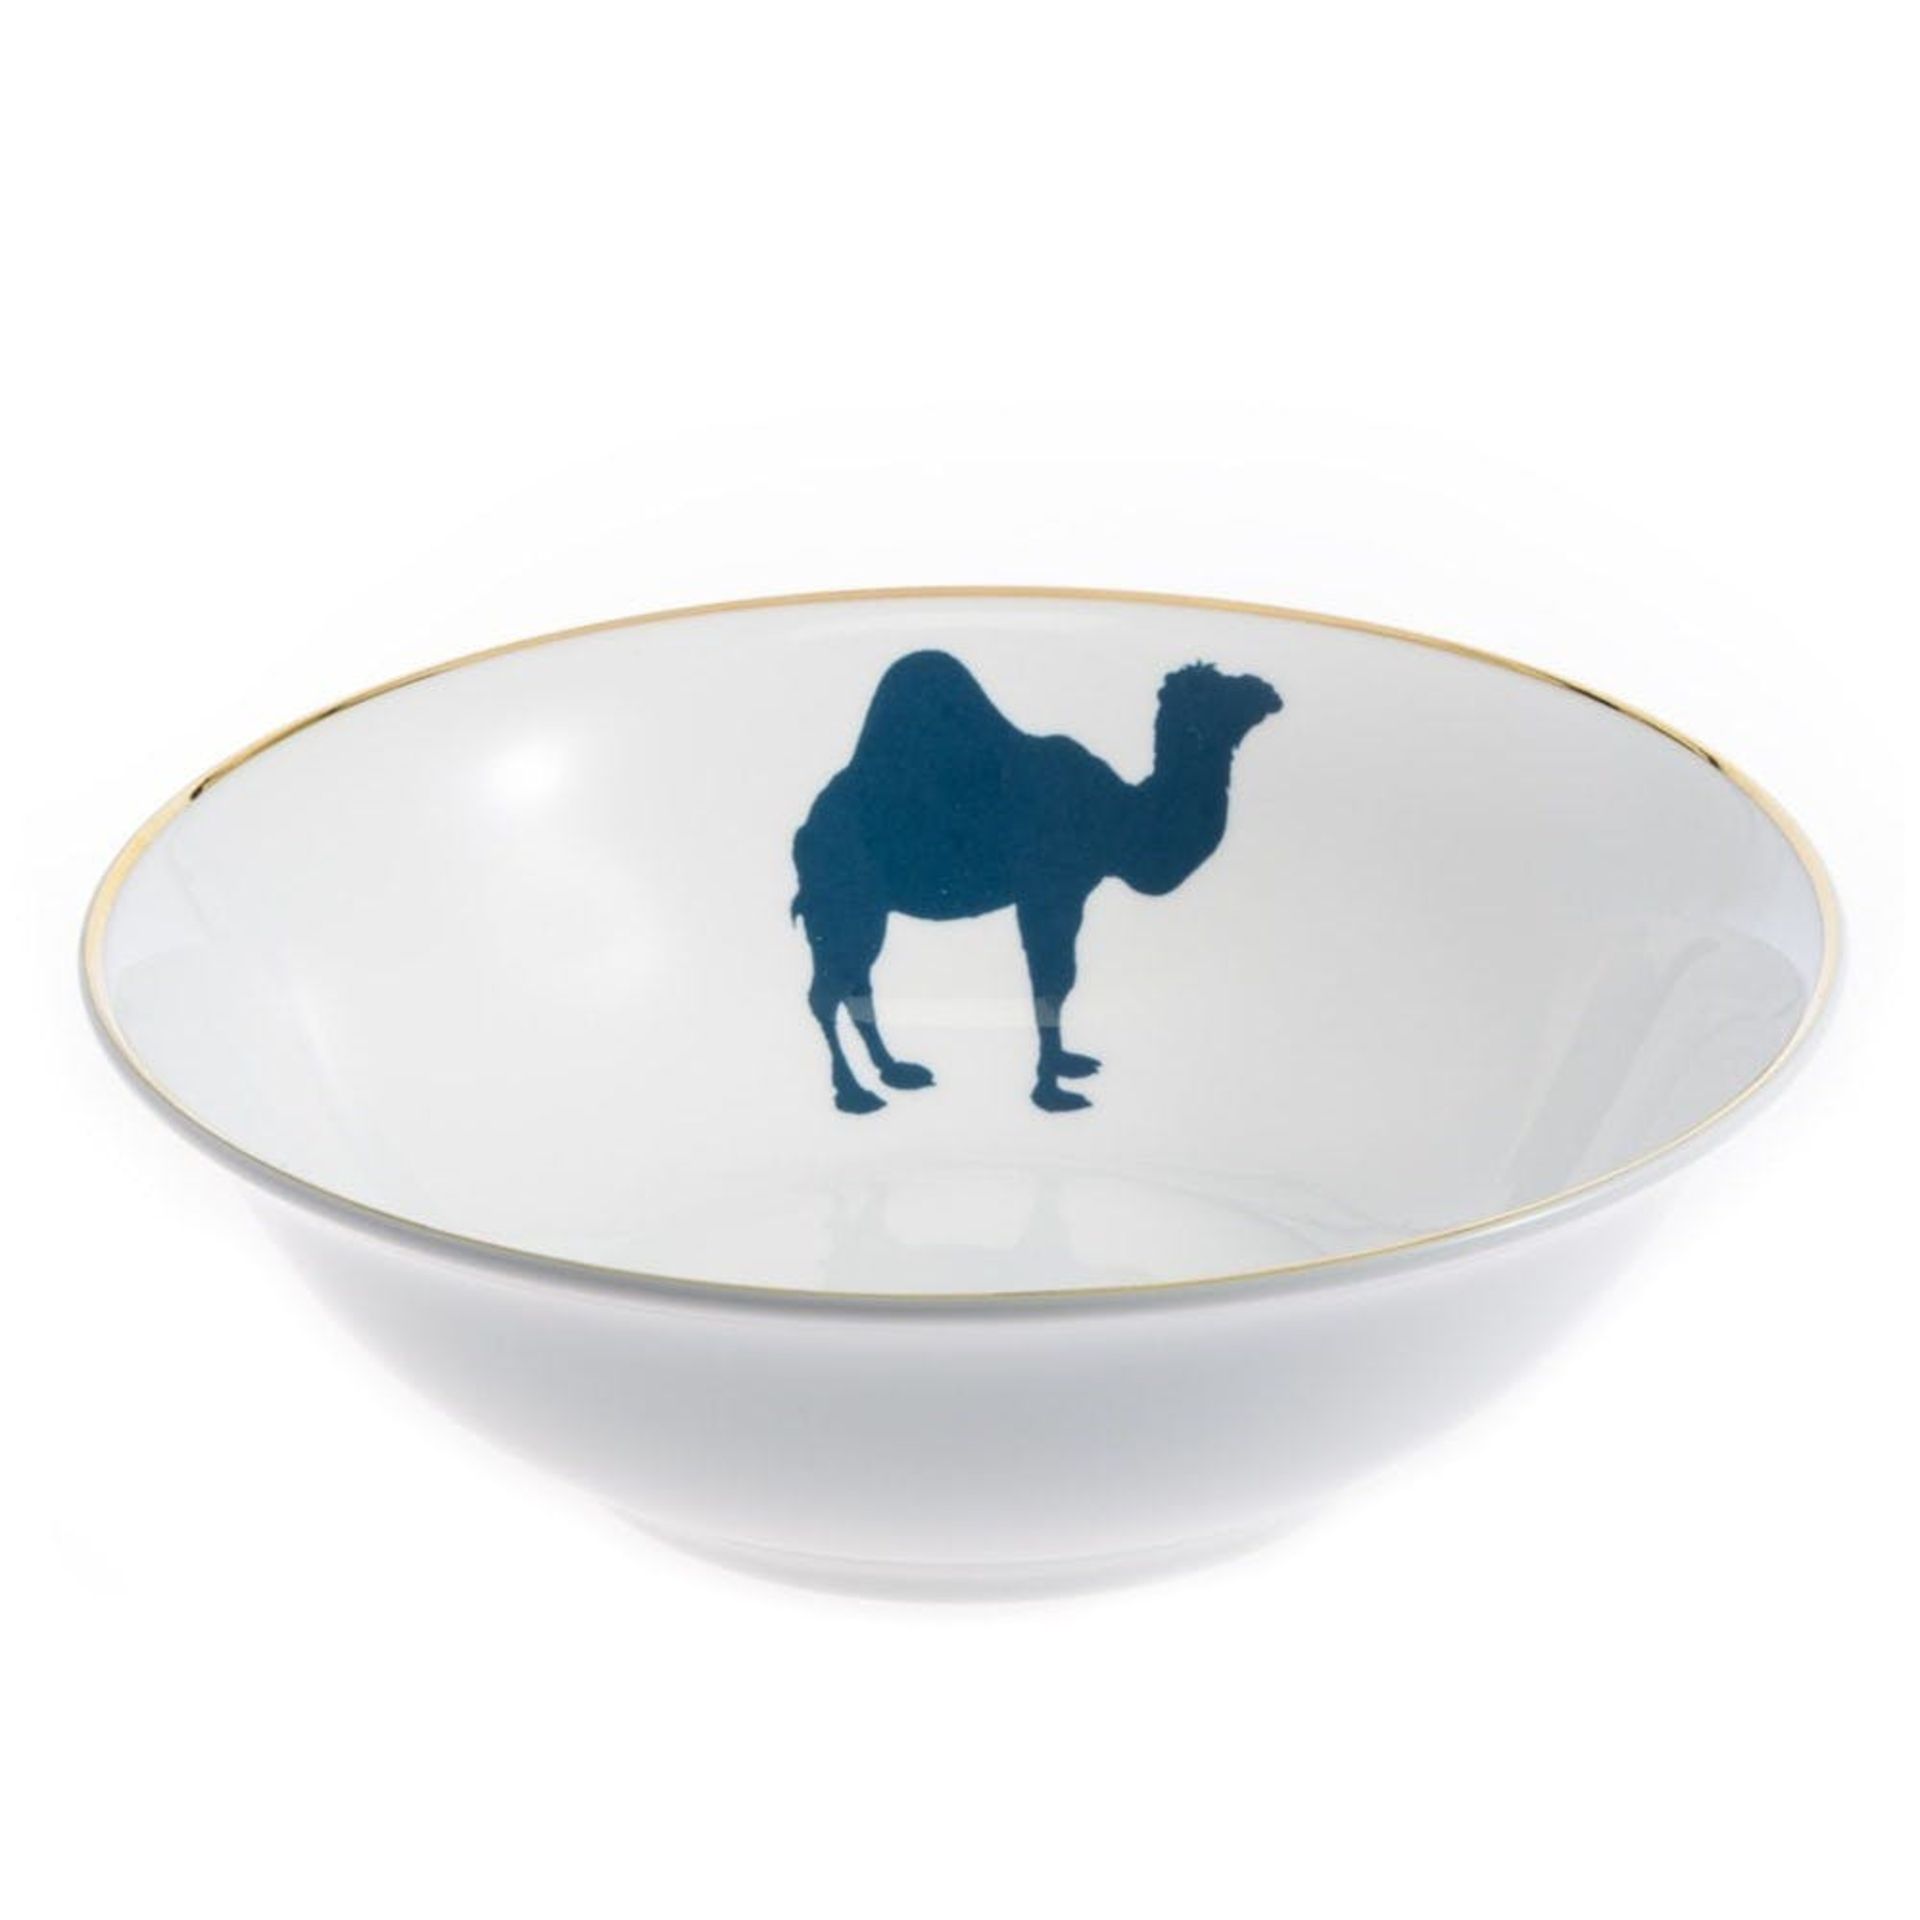 Alice Peto Cereal Bowl 16Cm Alice Peto Camel Hand-Painted Gold Rim RRP 26 About the Product(s)